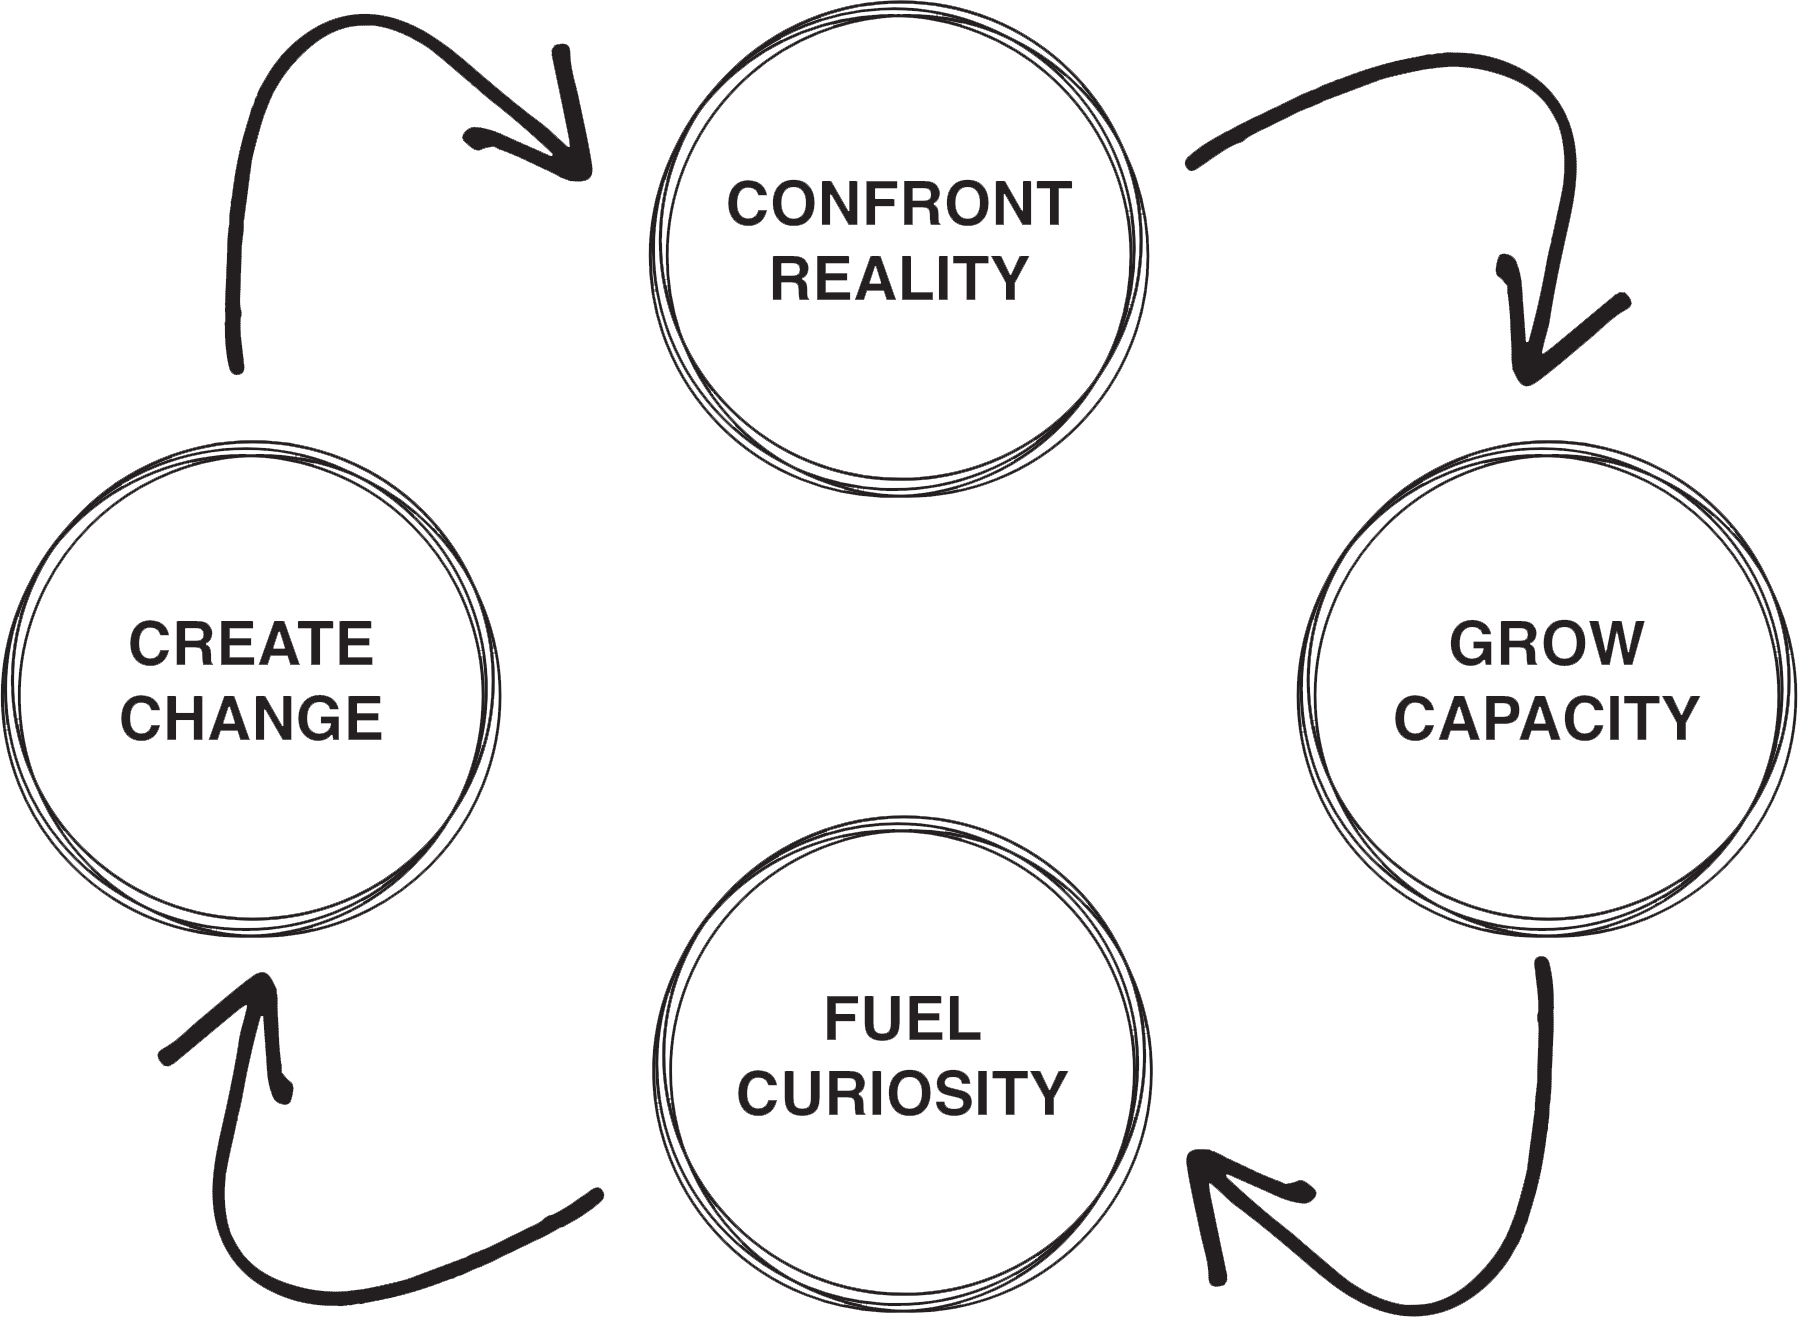 Fuel Curiosity, Grow Capacity, Confront Reality, Create Change